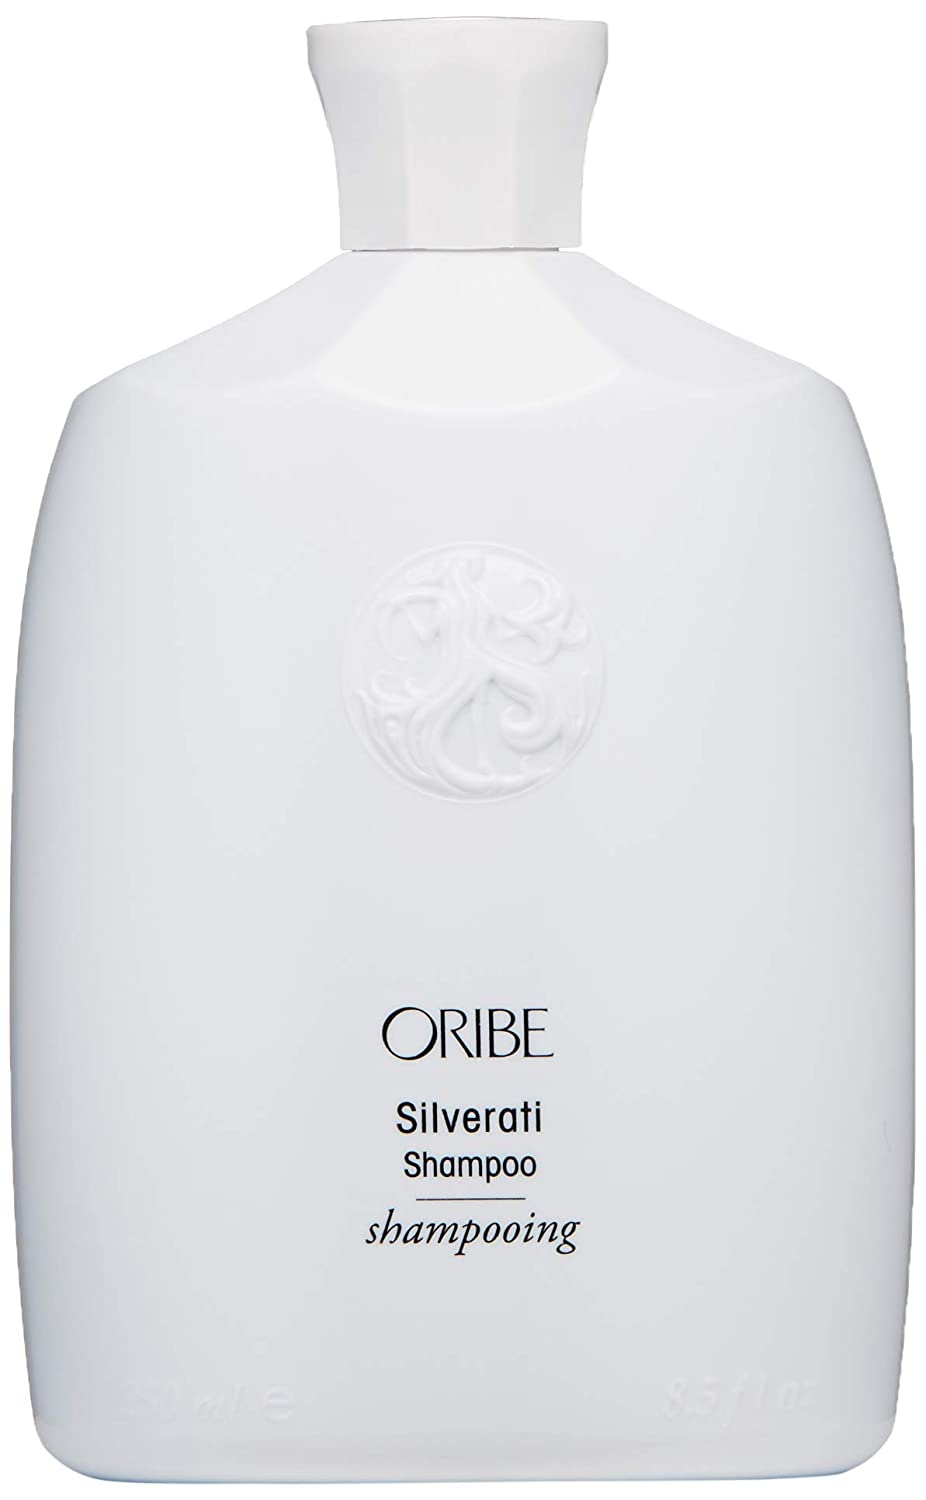  6. ORIBE Silverati Shampoo is the best for graysilver hair. 